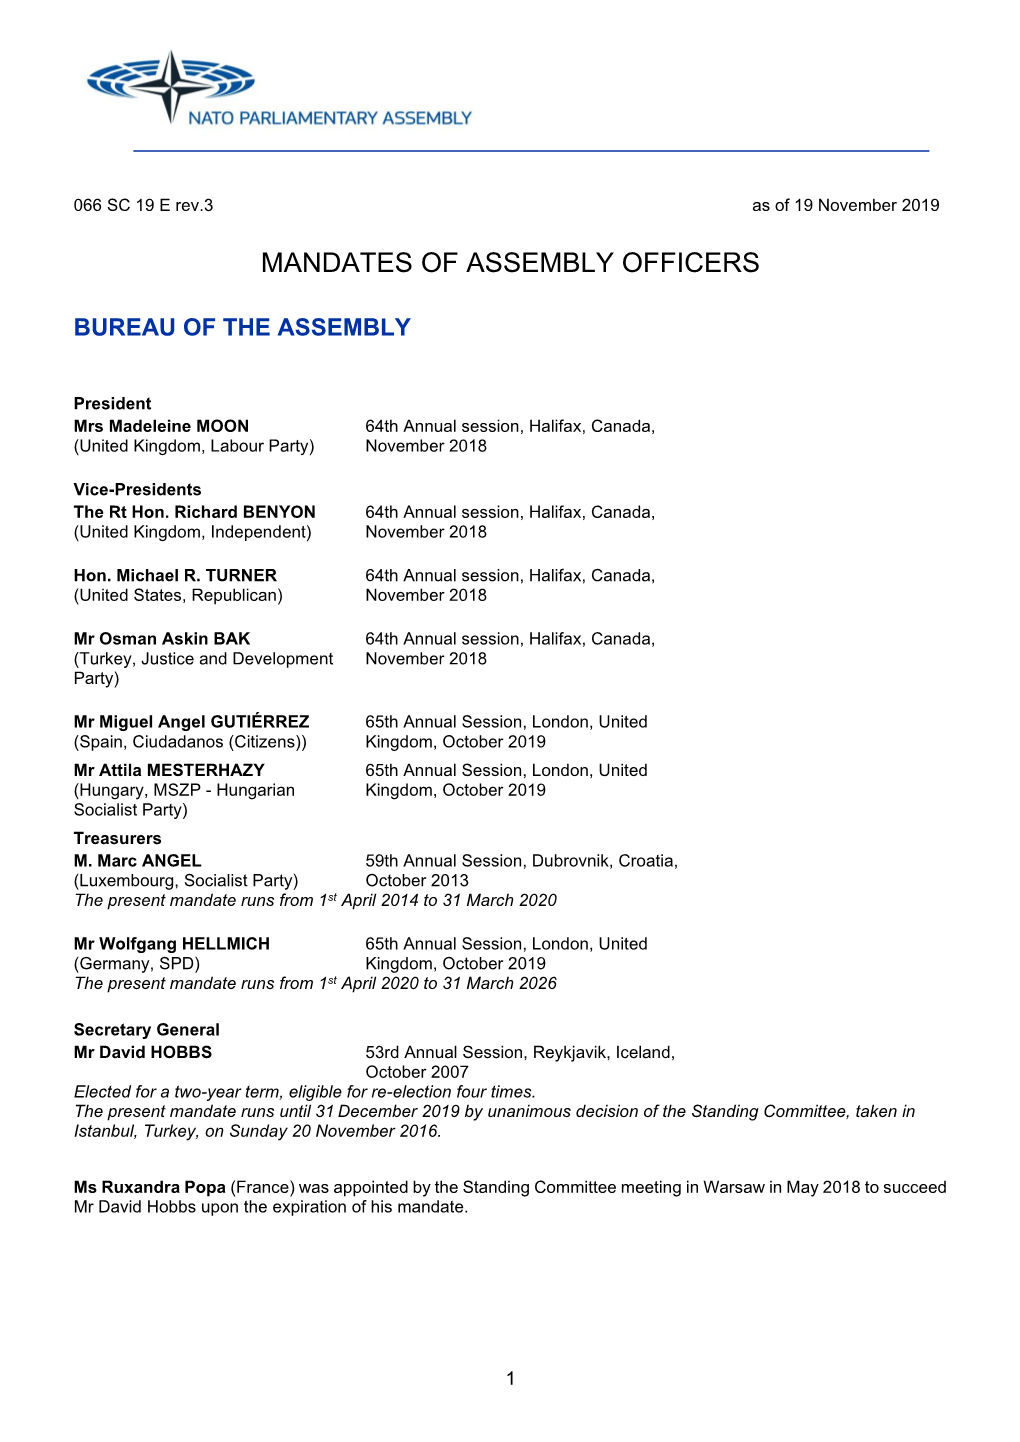 Mandates of Assembly Officers